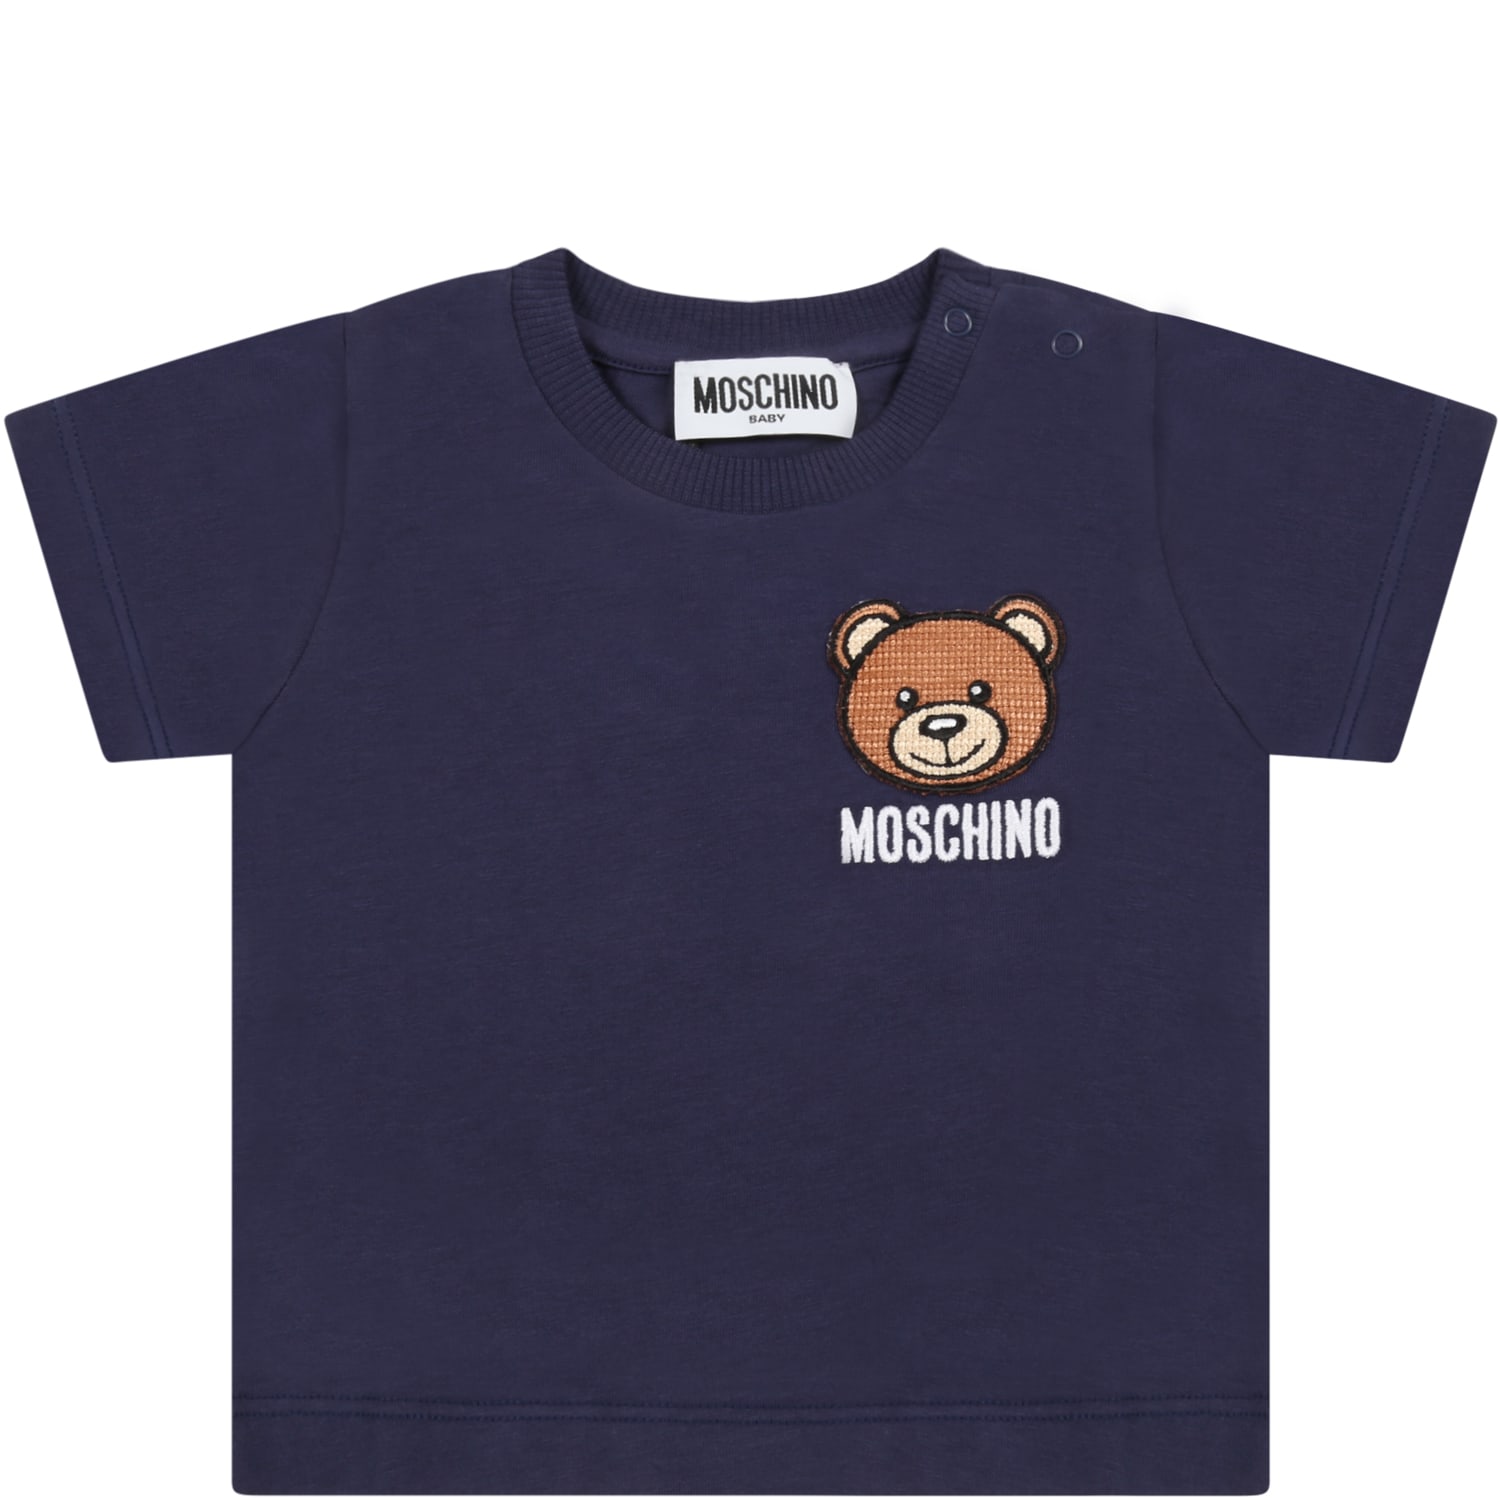 Moschino Blue T-shirt For Baby Kids With Teddy Bear